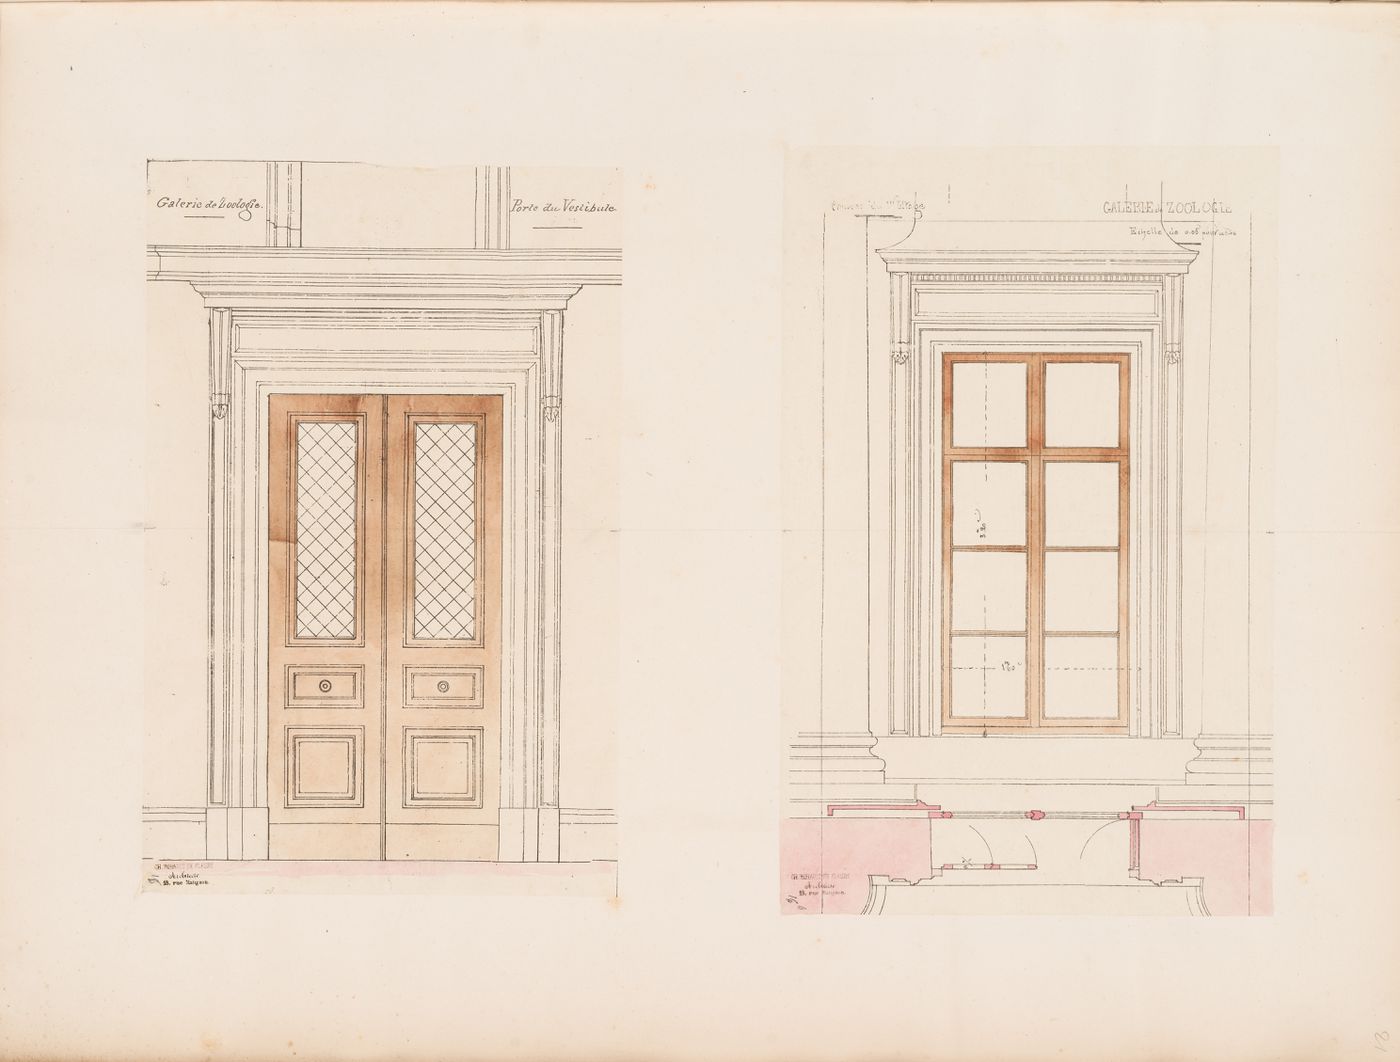 Project for a Galerie de zoologie, 1846: Elevation for the vestibule door and elevation and plan for the vestibule windows